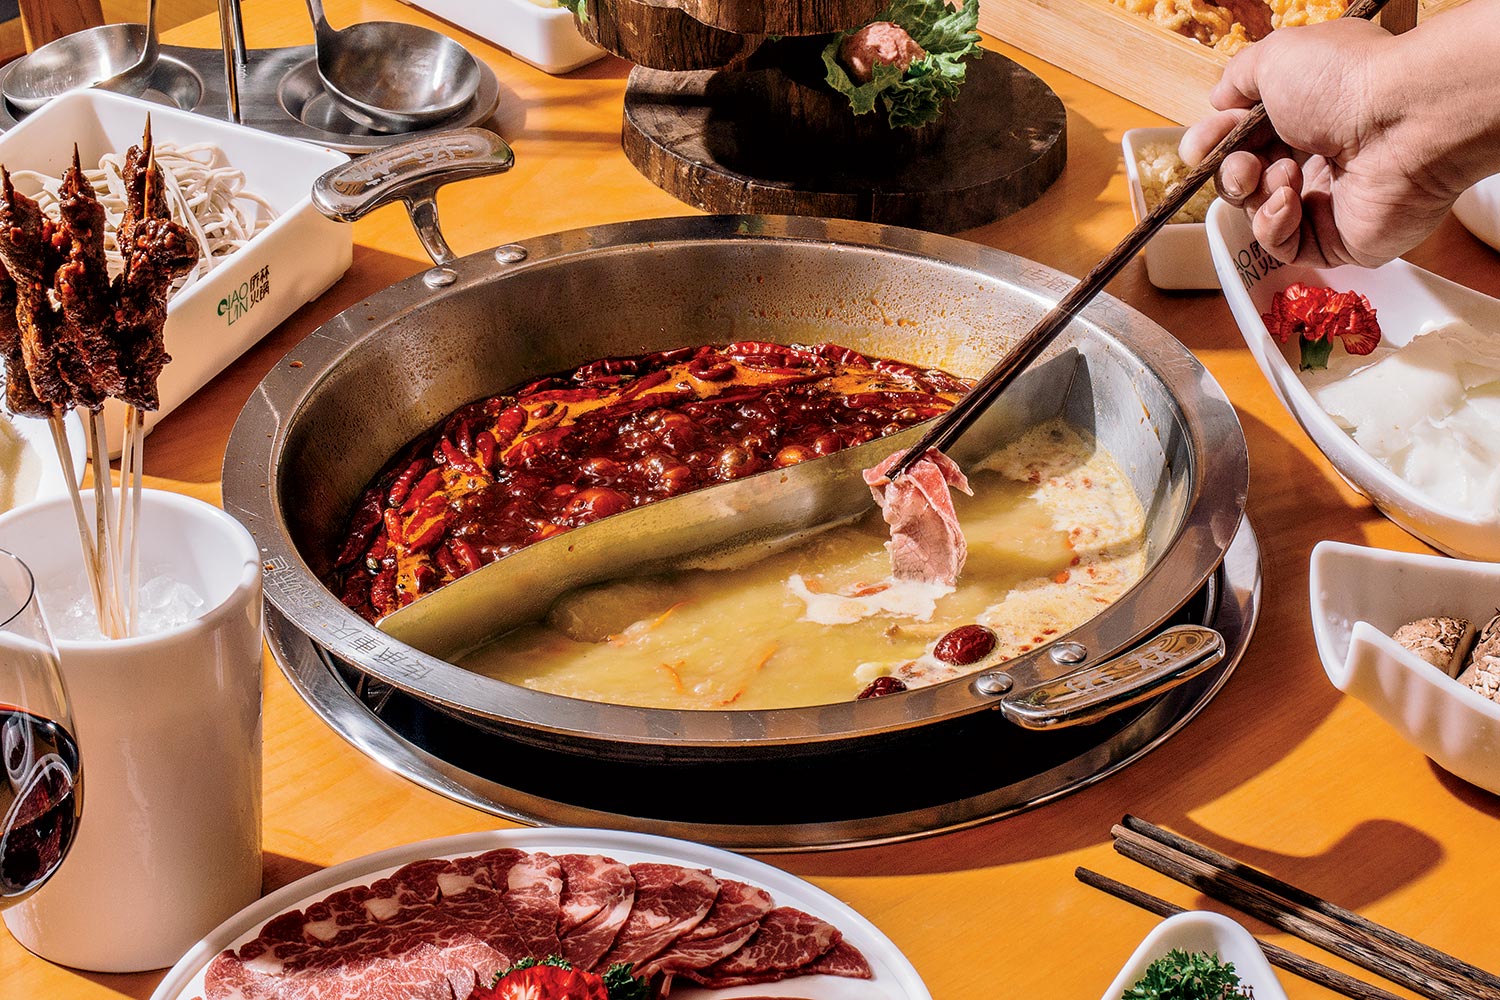 Chinese Hot Pot: A history and how-to - G Adventures